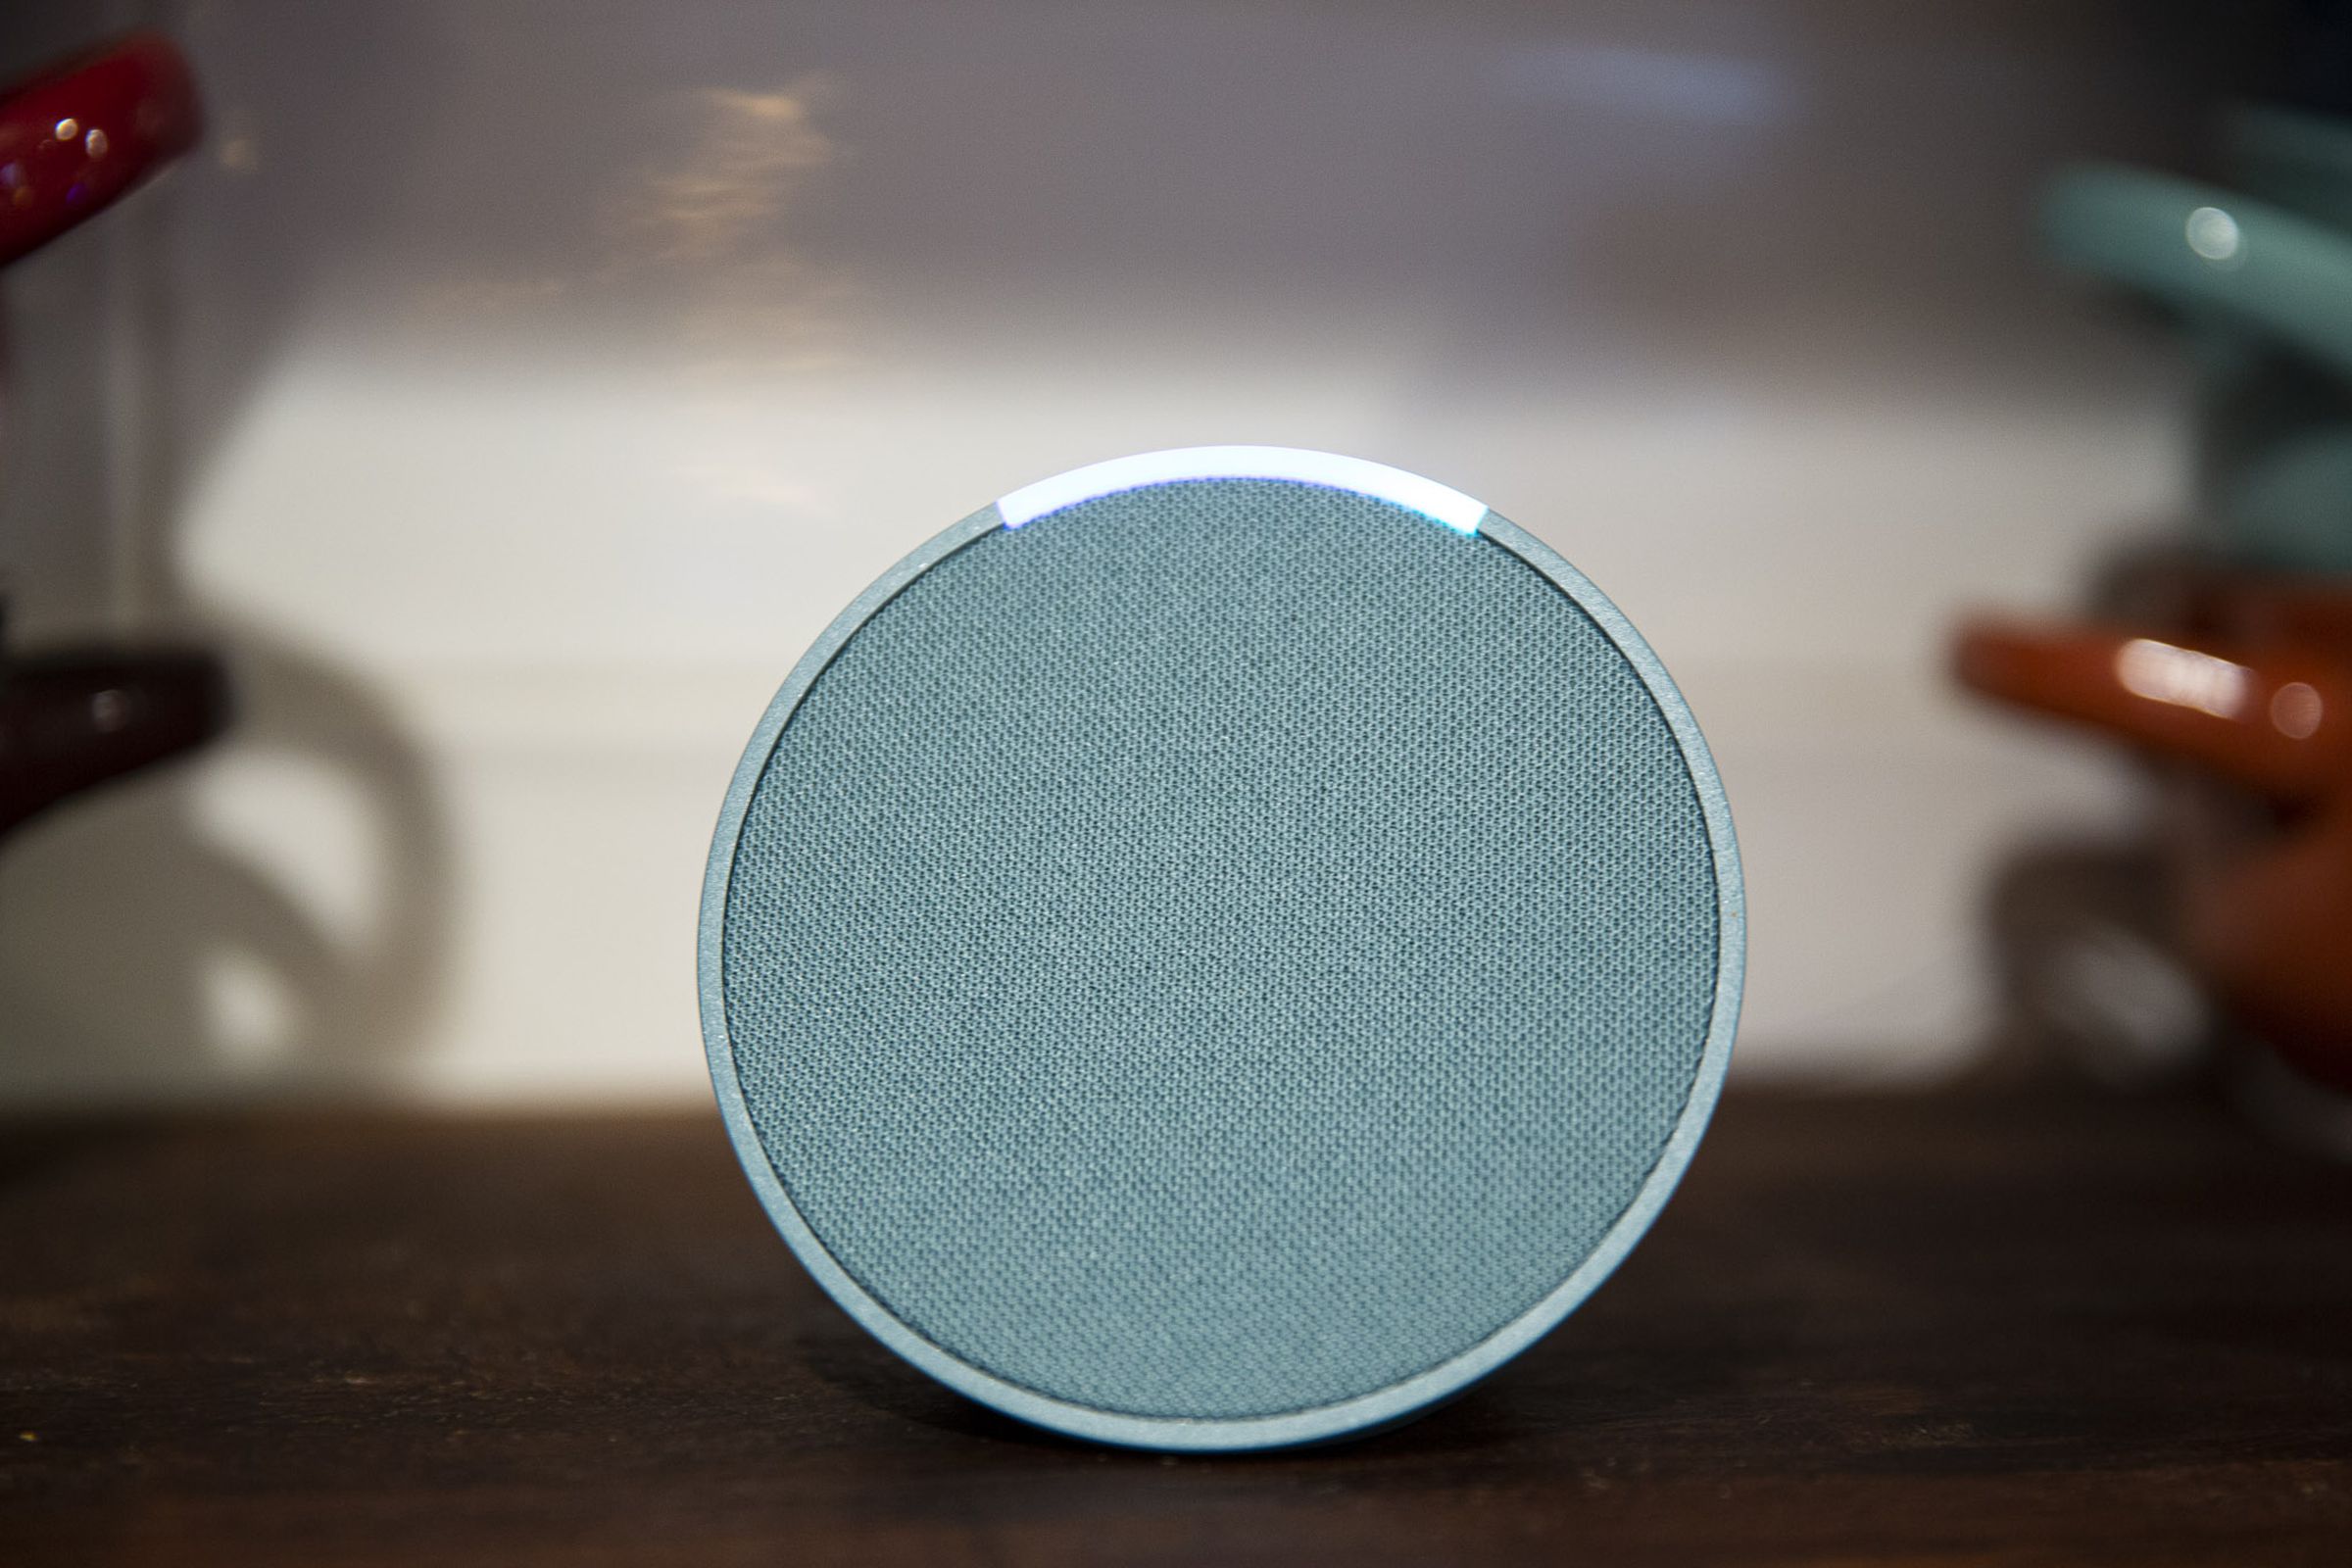 The Echo Pop’s Alexa light is on top, making it easier to see and less dominant in a dark room than the larger light ring on the Echo Dot.